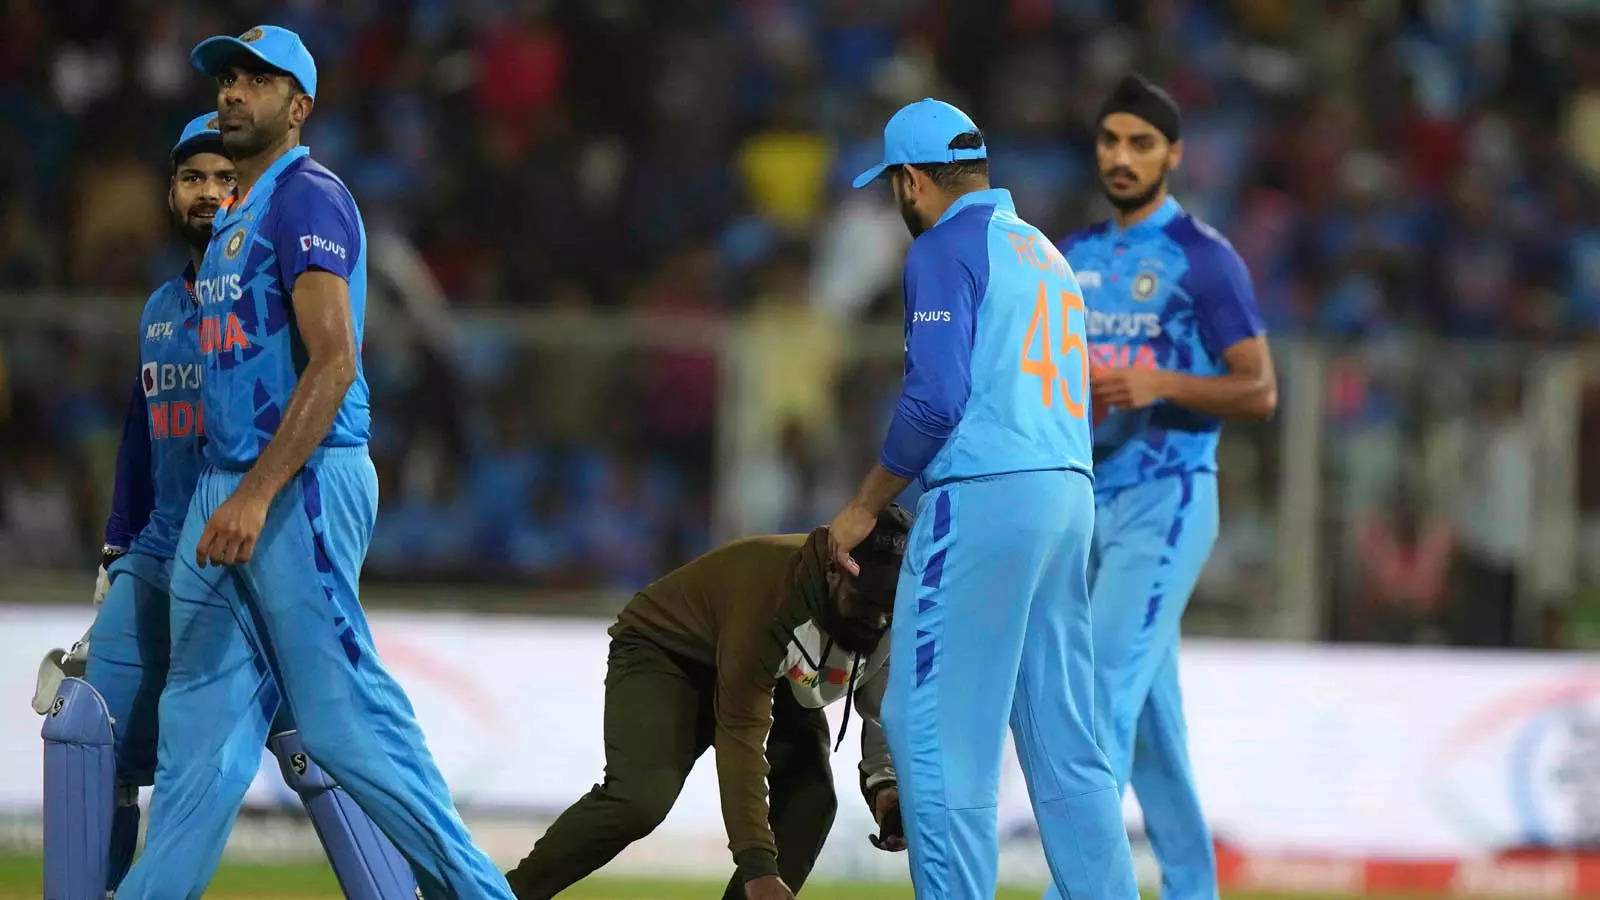 A fan breached security to touch Rohit Sharma's feet in 2nd T20I